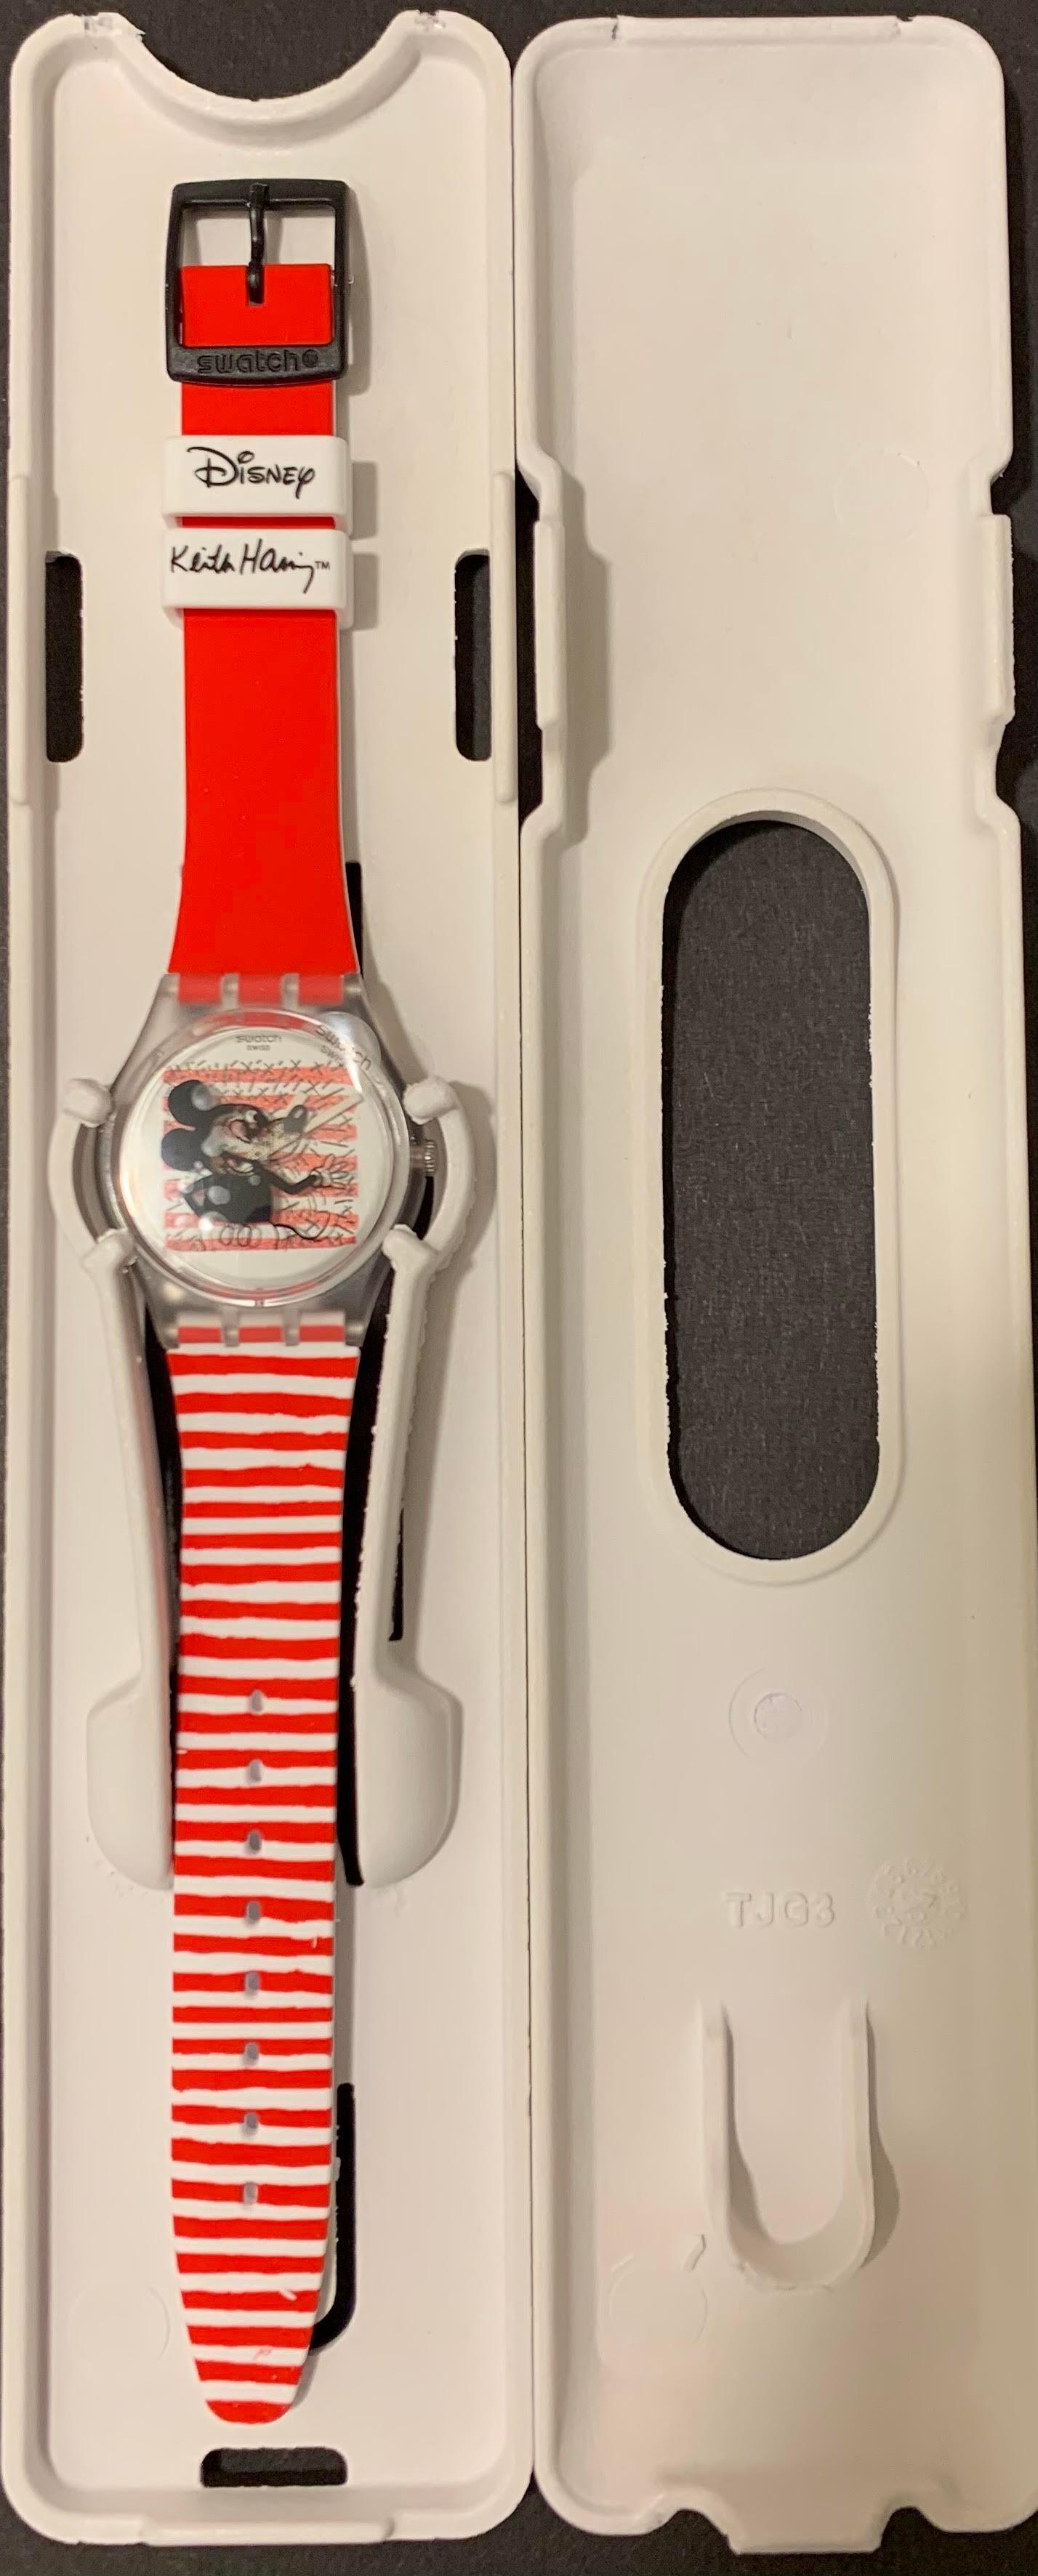 Swatch & Keith Haring Montre Disney Mickey Mouse Mariniere rouge en édition limitée - Art de (after) Keith Haring